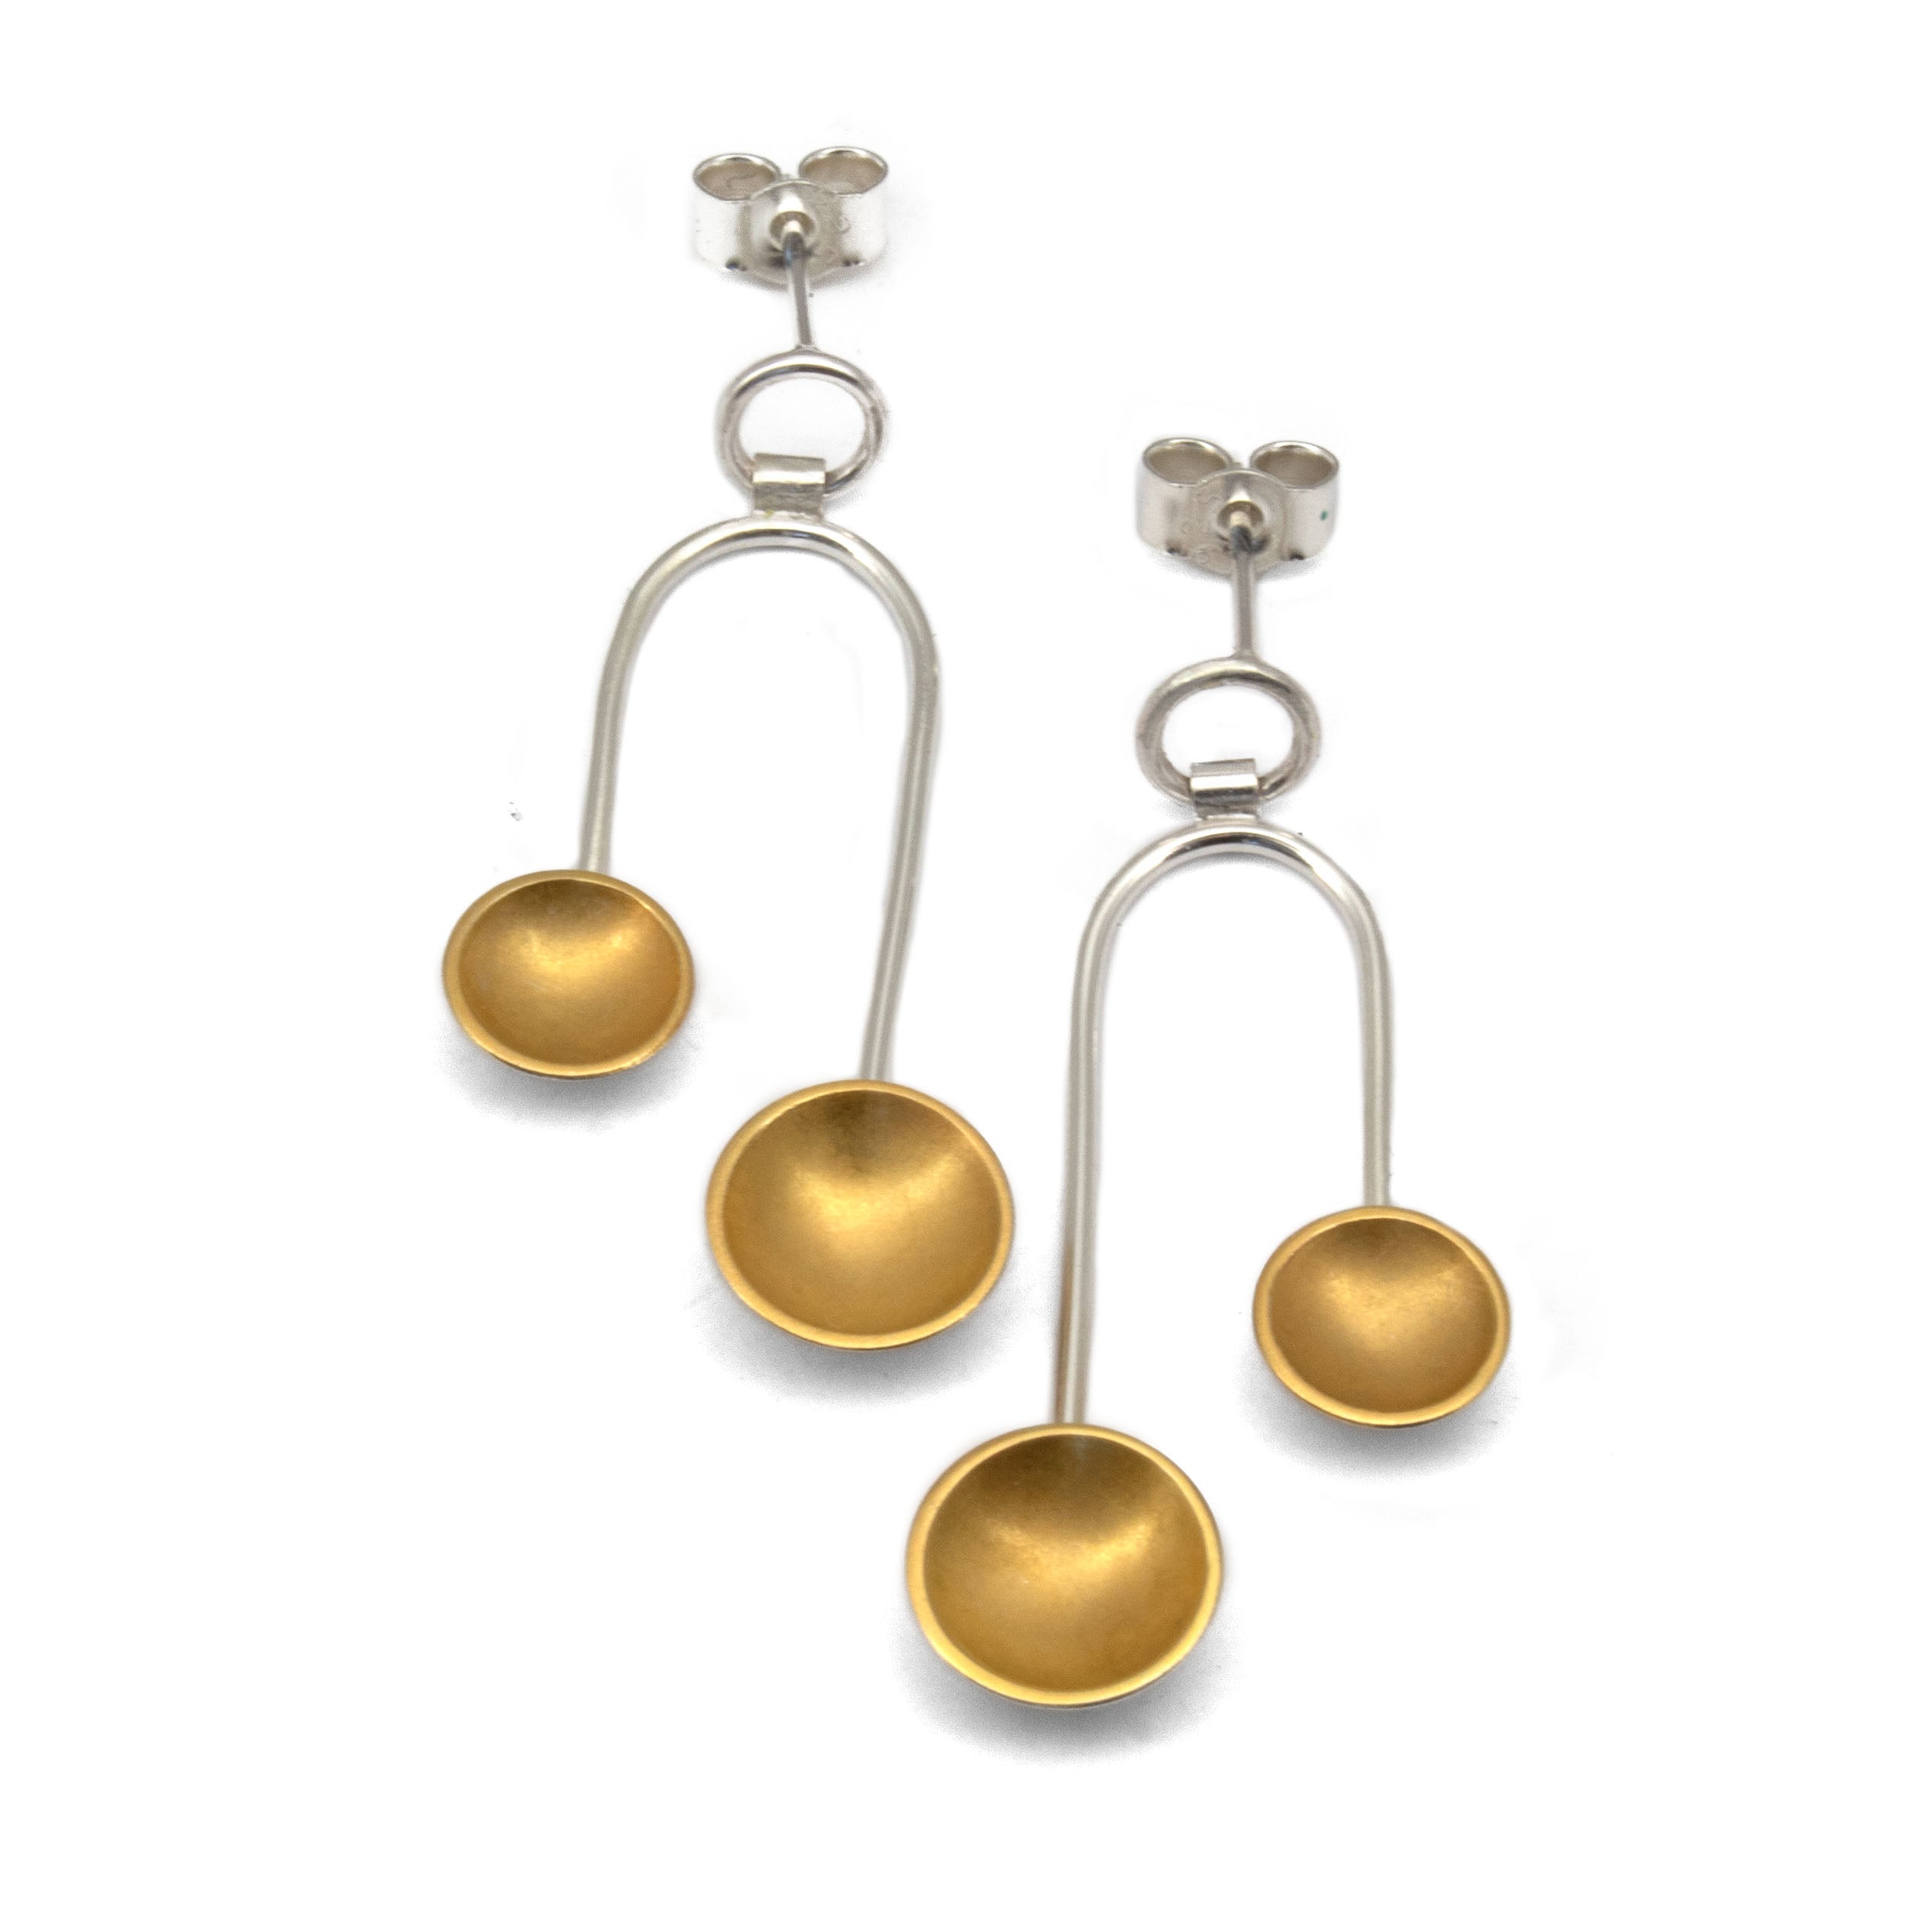 Halo Double Balance Earrings - Silver and Gold-Plating